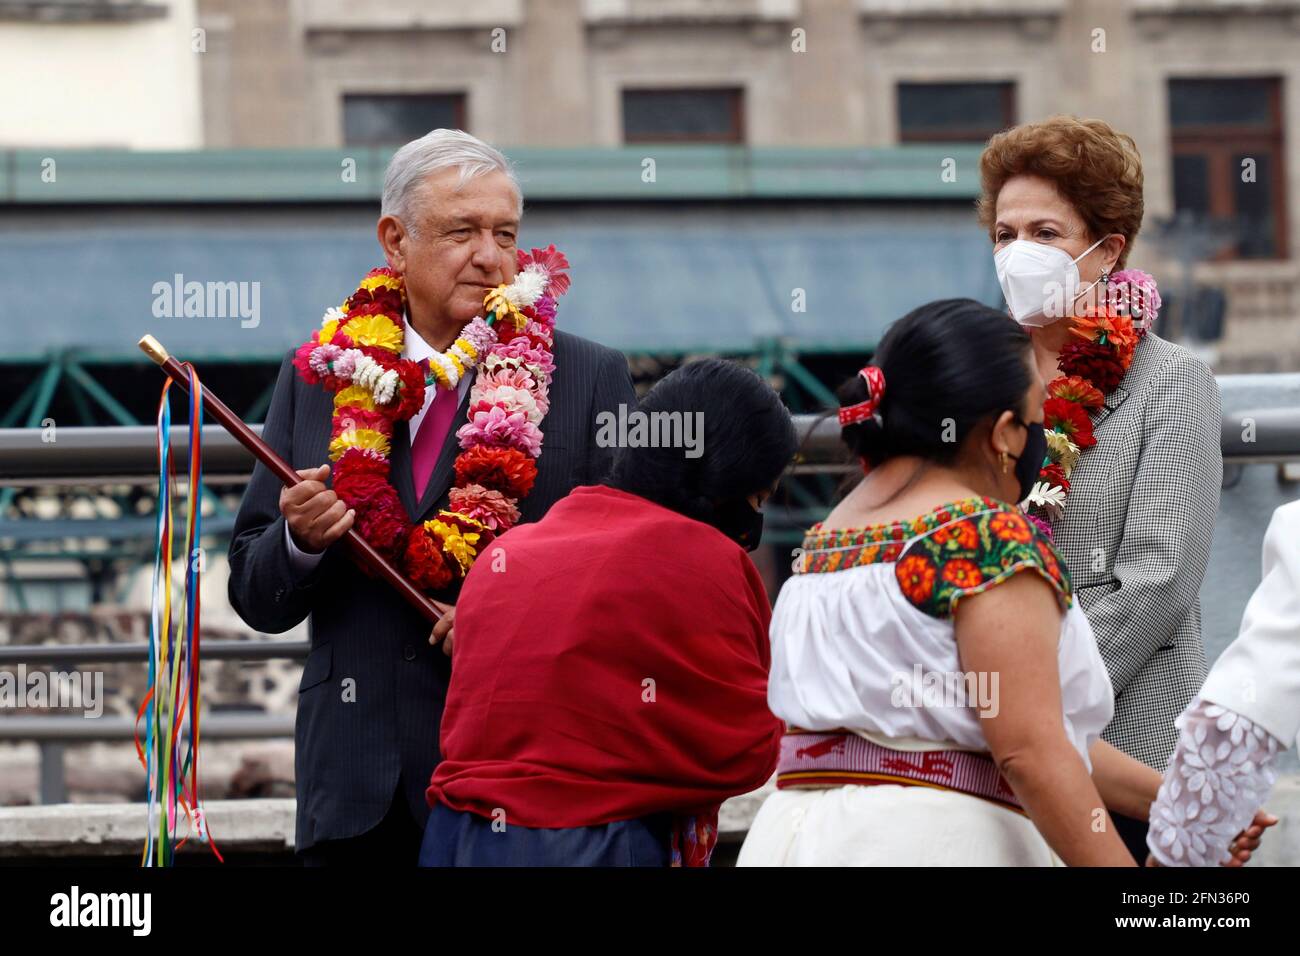 Mexico City, Mexico. 13th May, 2021. MEXICO CITY, MEXICO - MAY 13: Mexico's President, Andres Manuel Lopez Obrador, accompanied by the former president of Brazil, Dilma Rousseff, during ceremony for the 700 years of the founding of Tenochtitlan at the Museo del Templo Mayor on May 13, 2021 in Mexico City, Mexico. (Photo by Eyepix/Sipa USA) Credit: Sipa USA/Alamy Live News Stock Photo